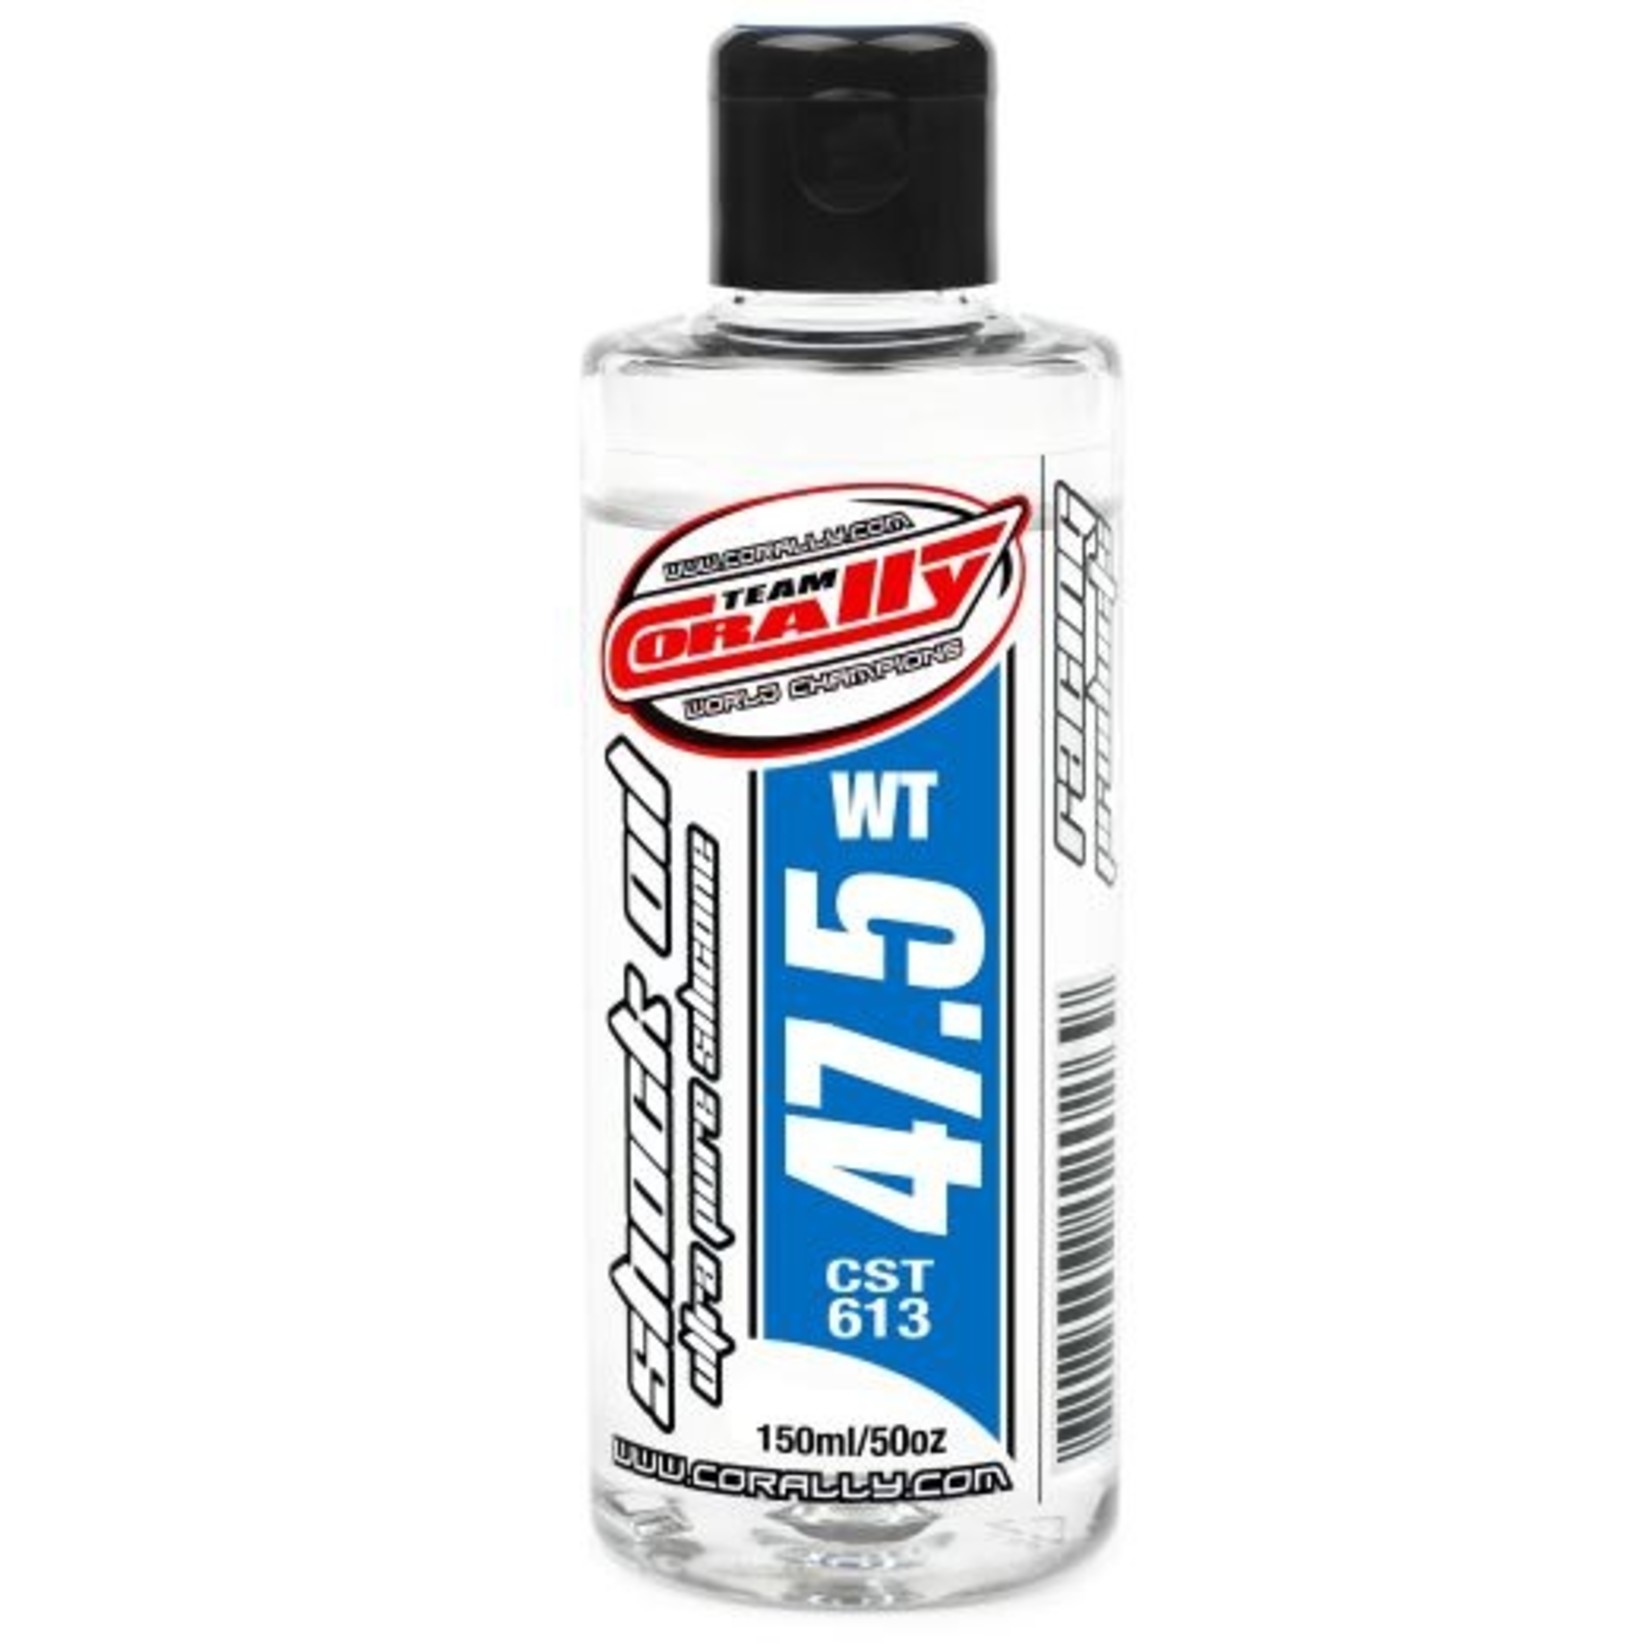 Corally (Team Corally) Ultra Pure Silicone Shock Oil - 47.5 WT - 150ml